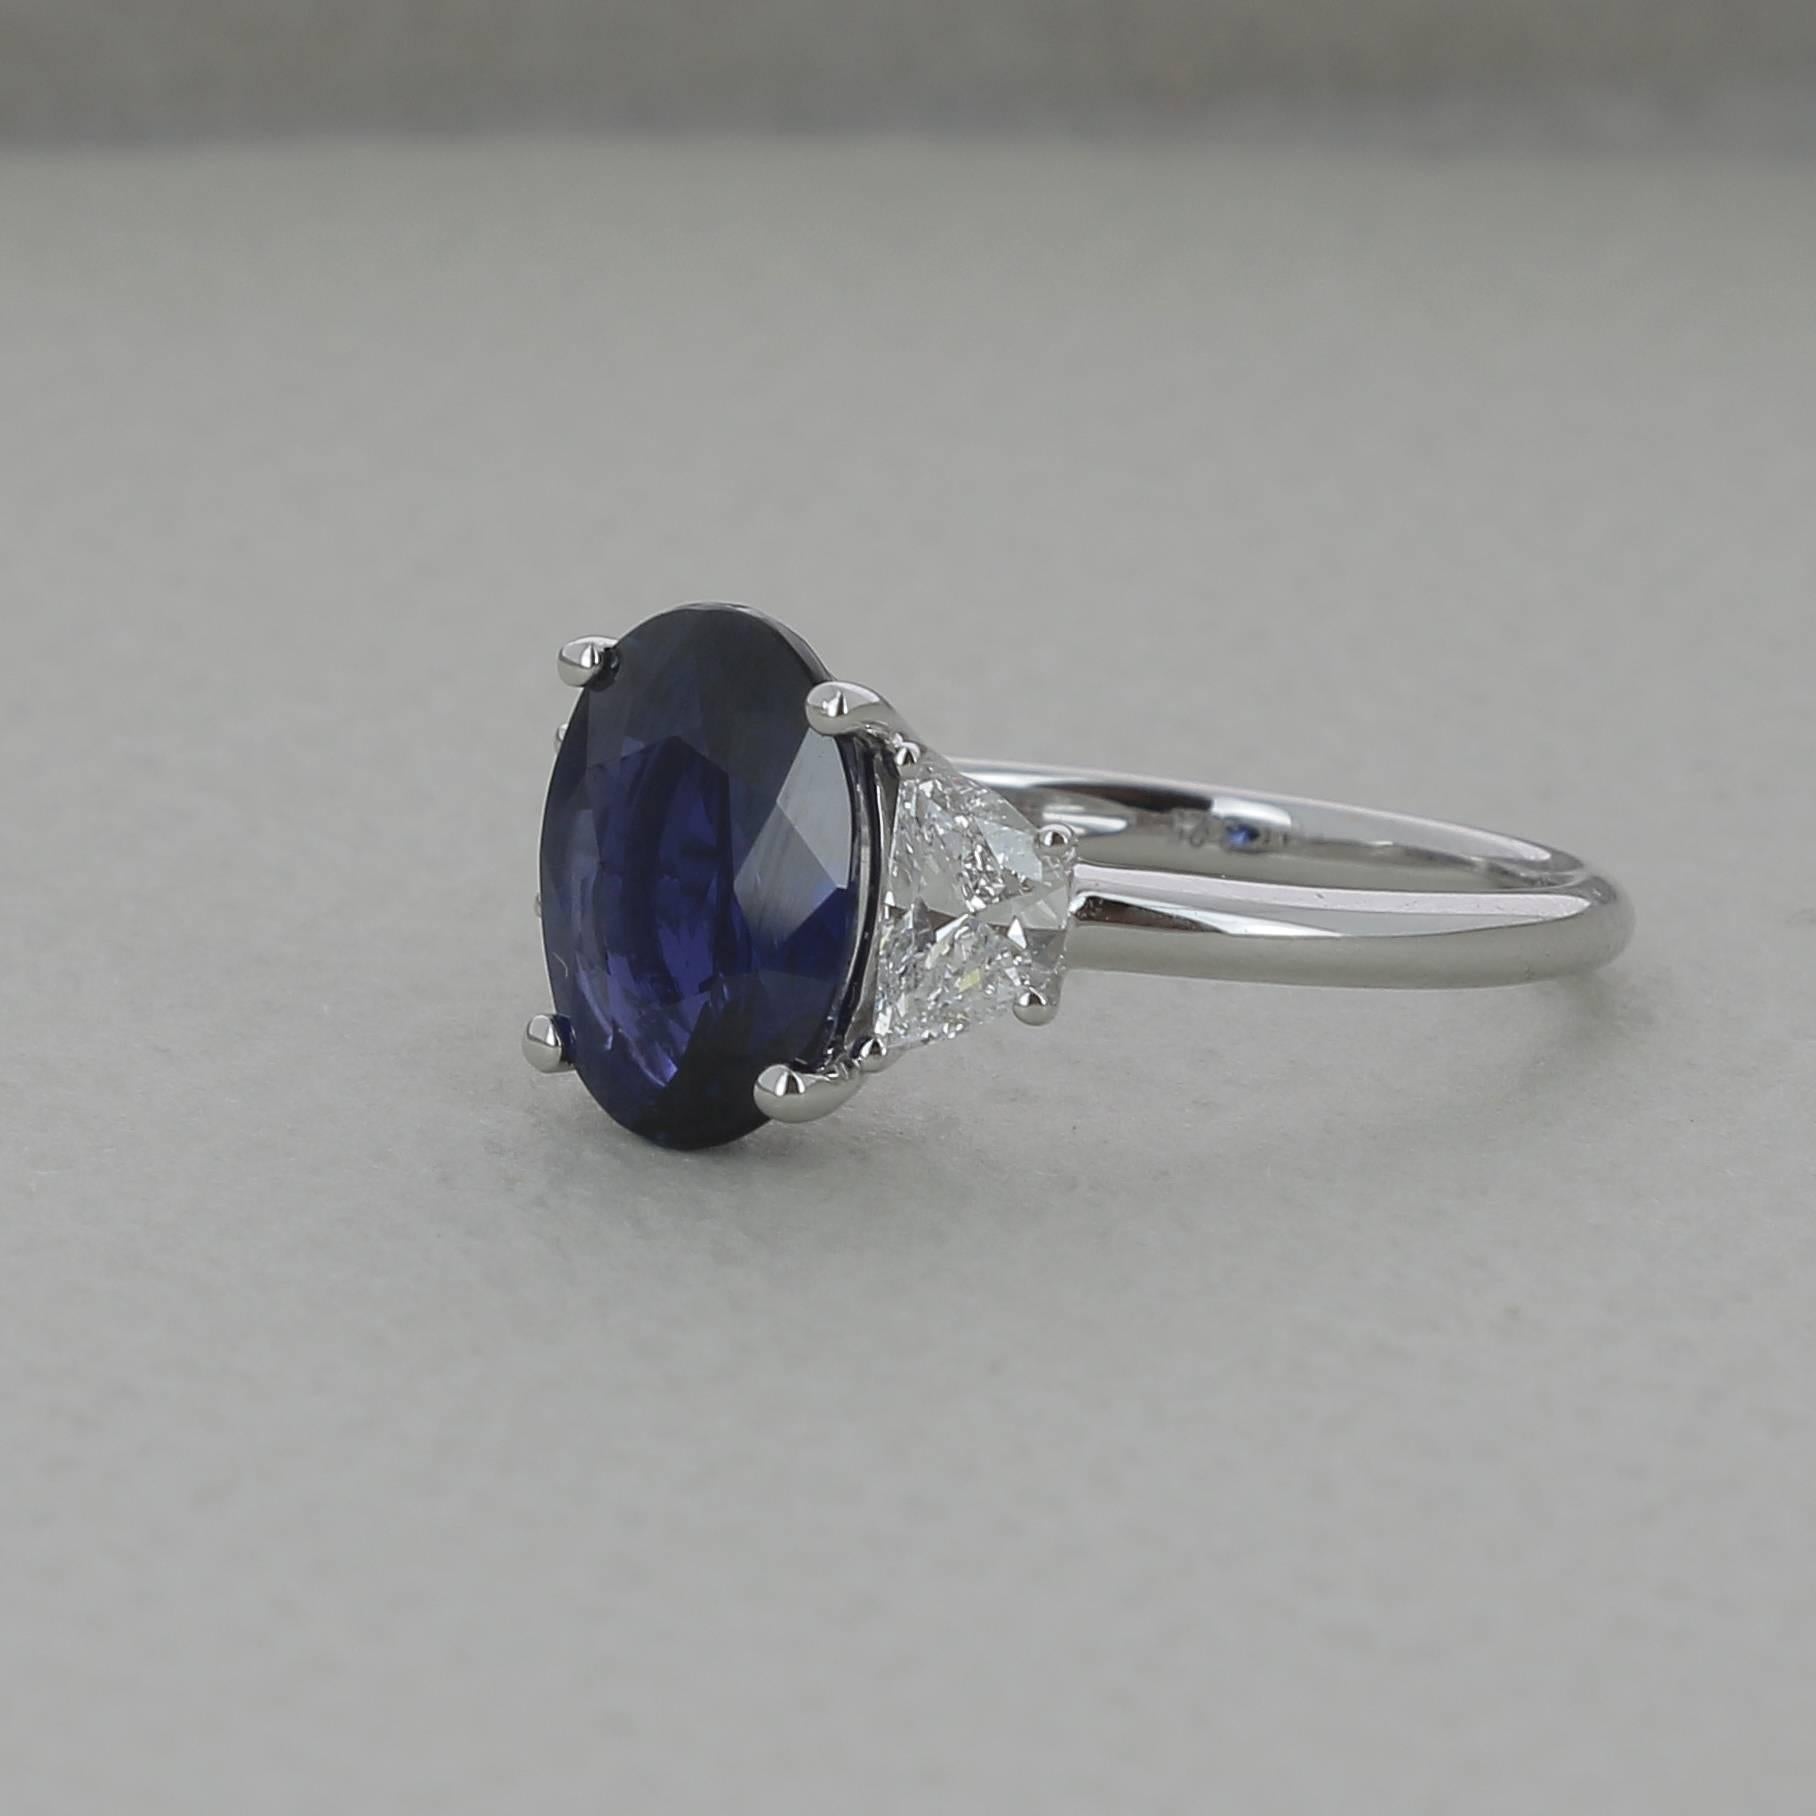 An amazing Oval Royal Blue Blue Sapphire Ring, flanked on each side by a single Half-Moon Diamonds weighing 0.26 Carats.
The total weight of the Sapphire is 3.26 Carats, the Gemstone is certified as a Vivid Blue (Type: 